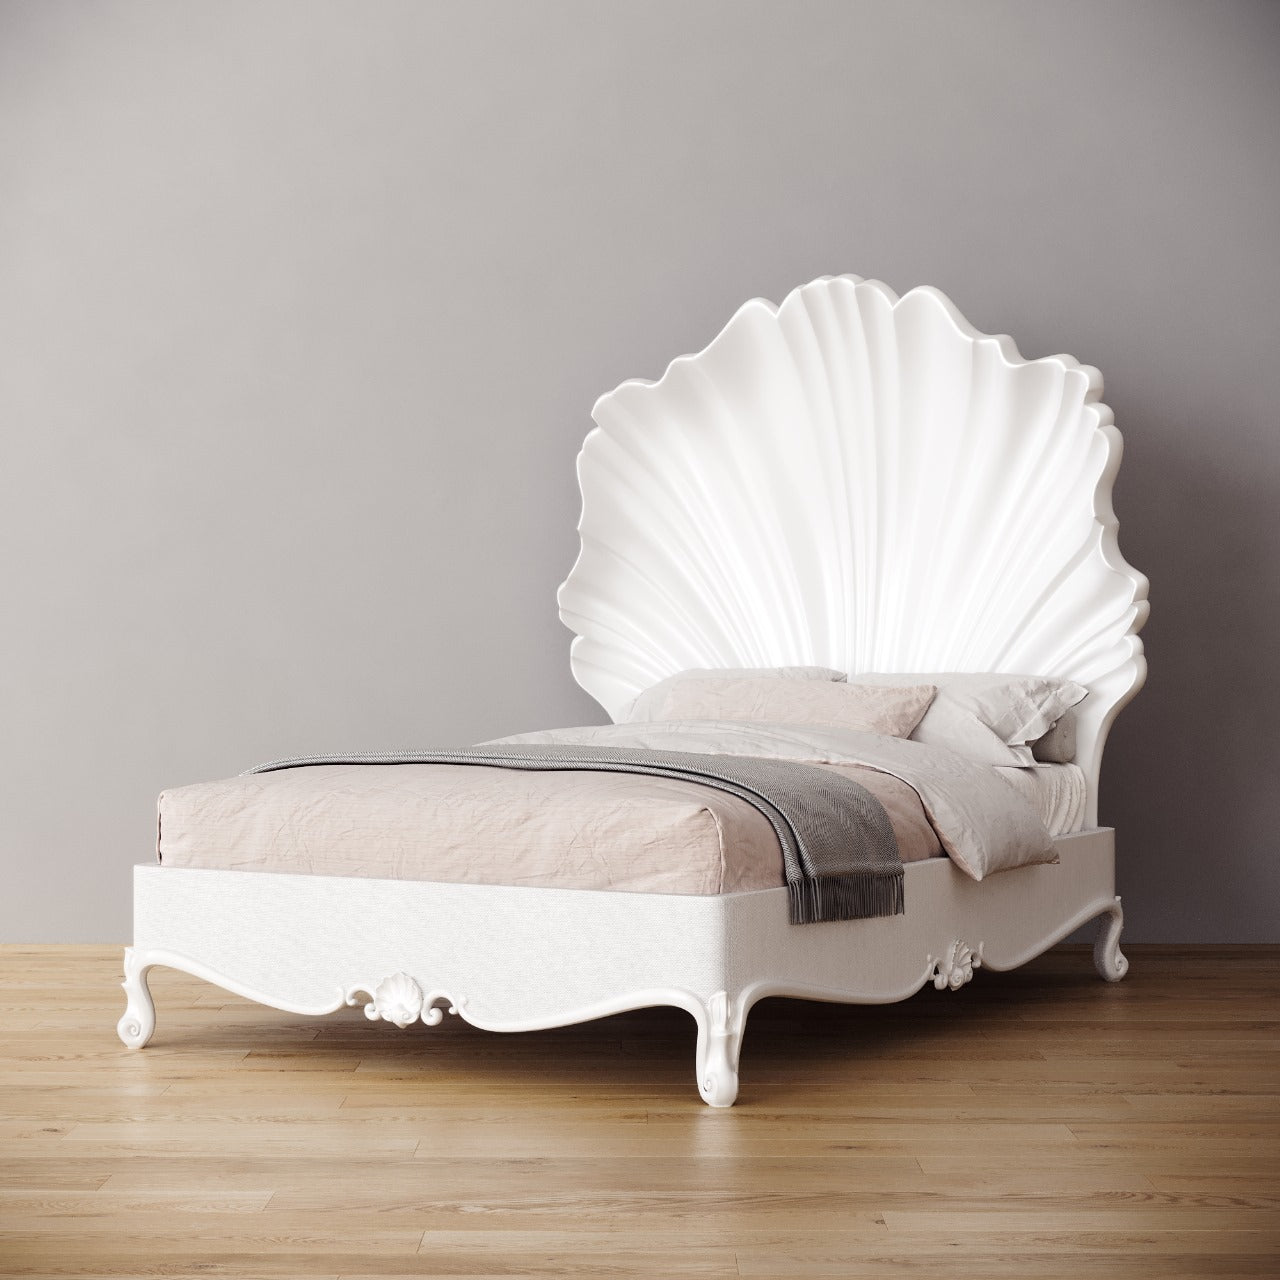 Scalloped Shell Bed Double Size